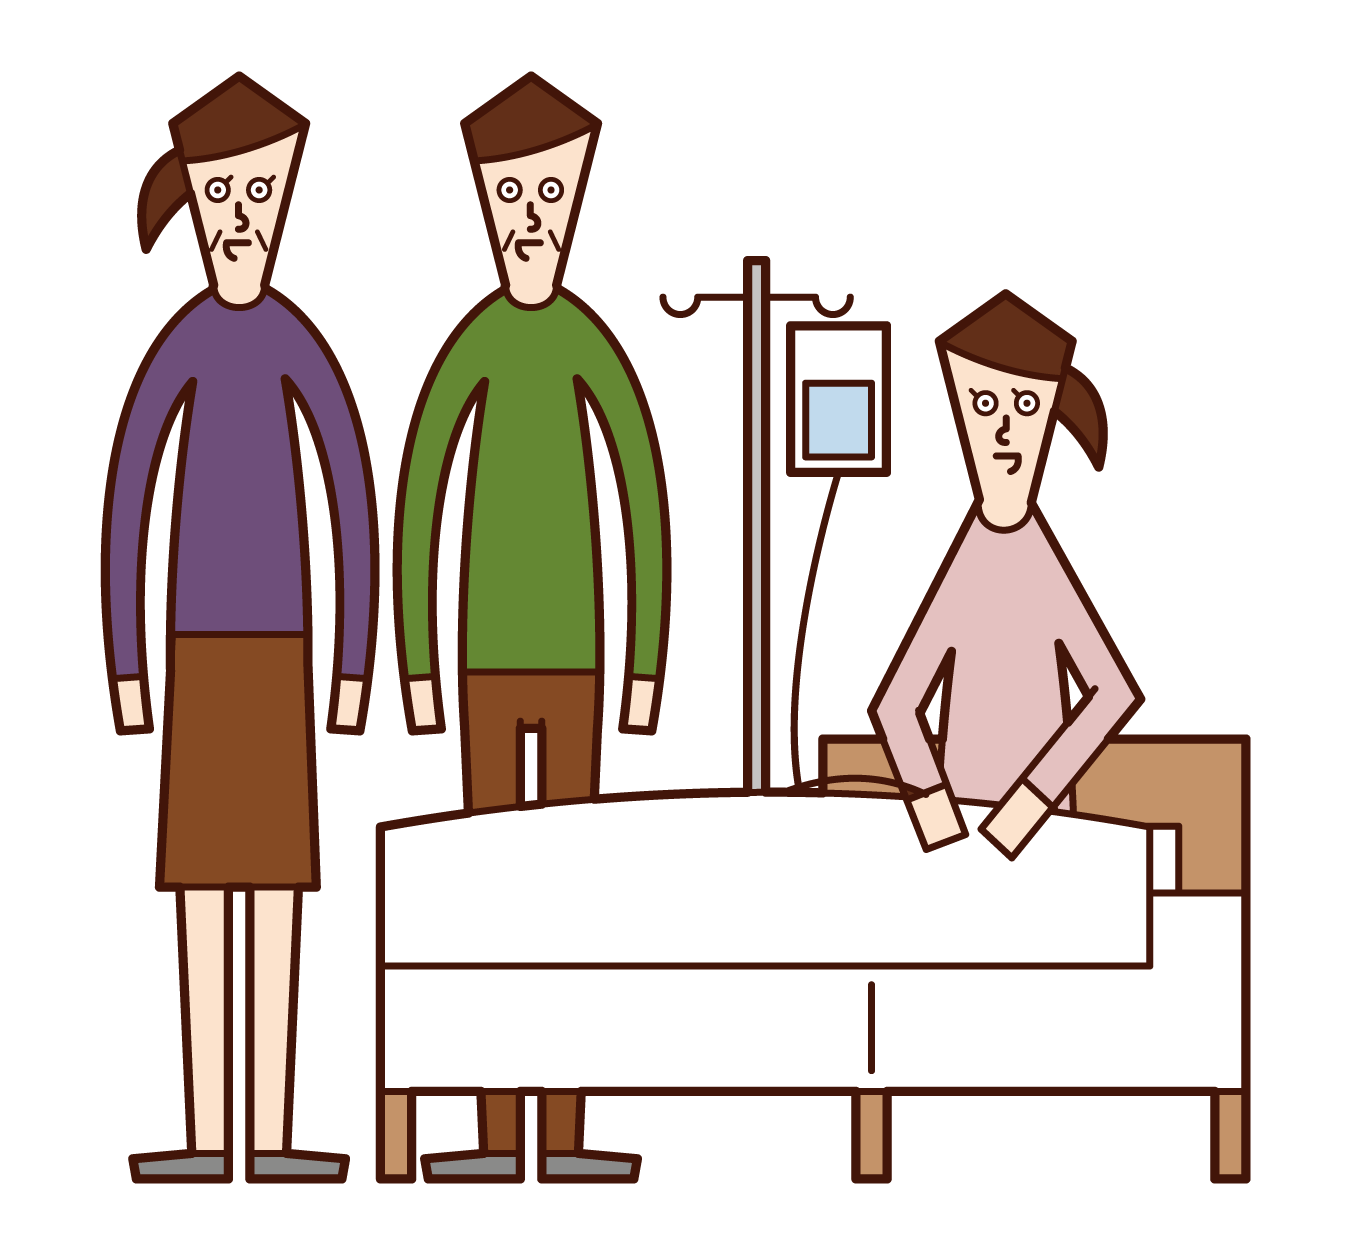 Illustration of a family visiting an old grandmother who is in hospital